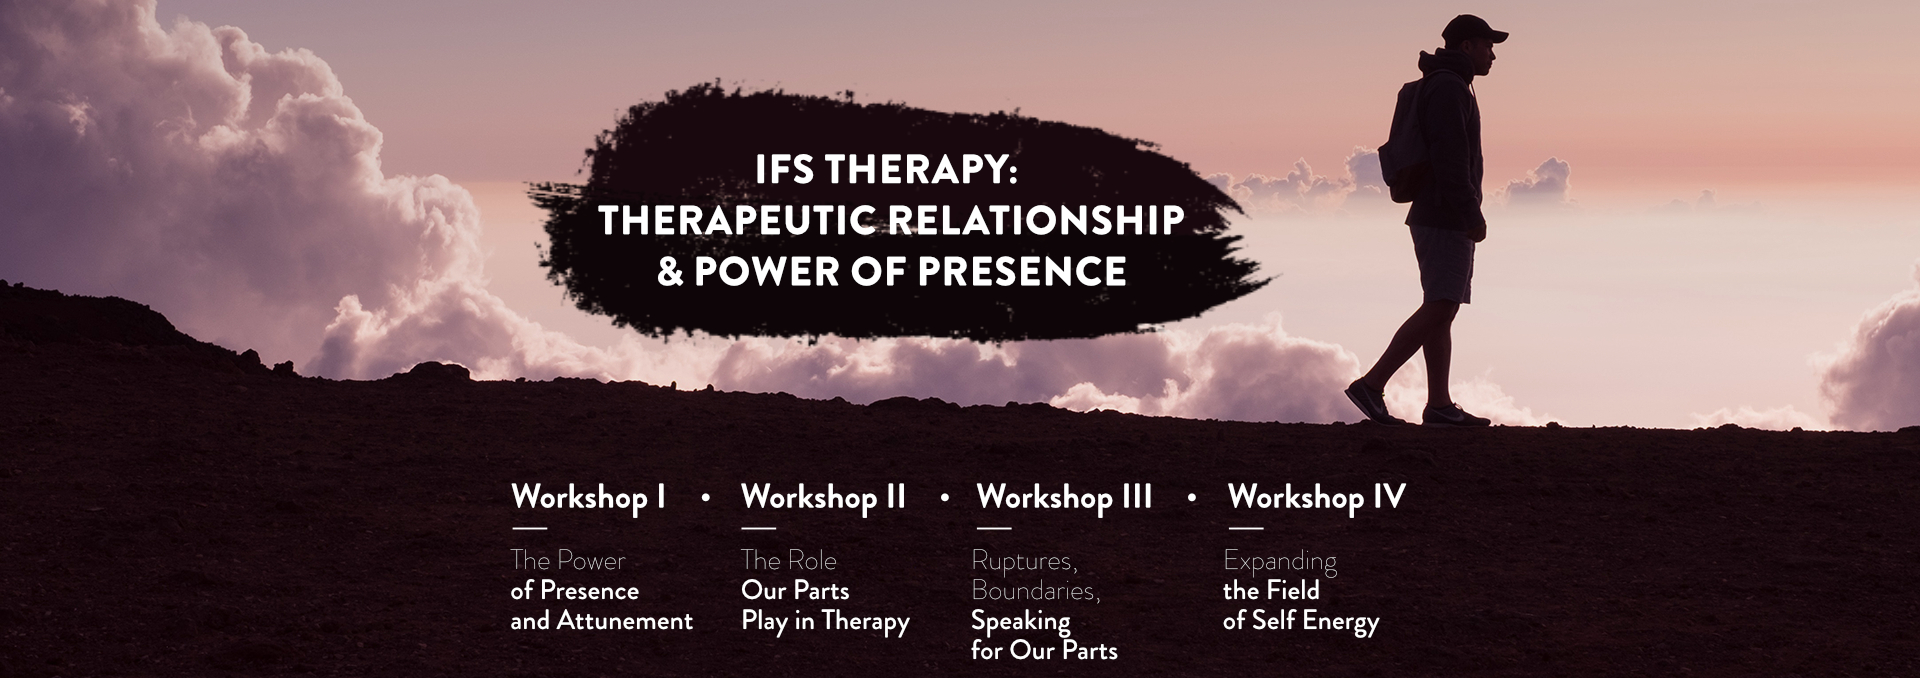 IFS Therapy: Therapeutic Relationship & Power of Presence [LP] 1